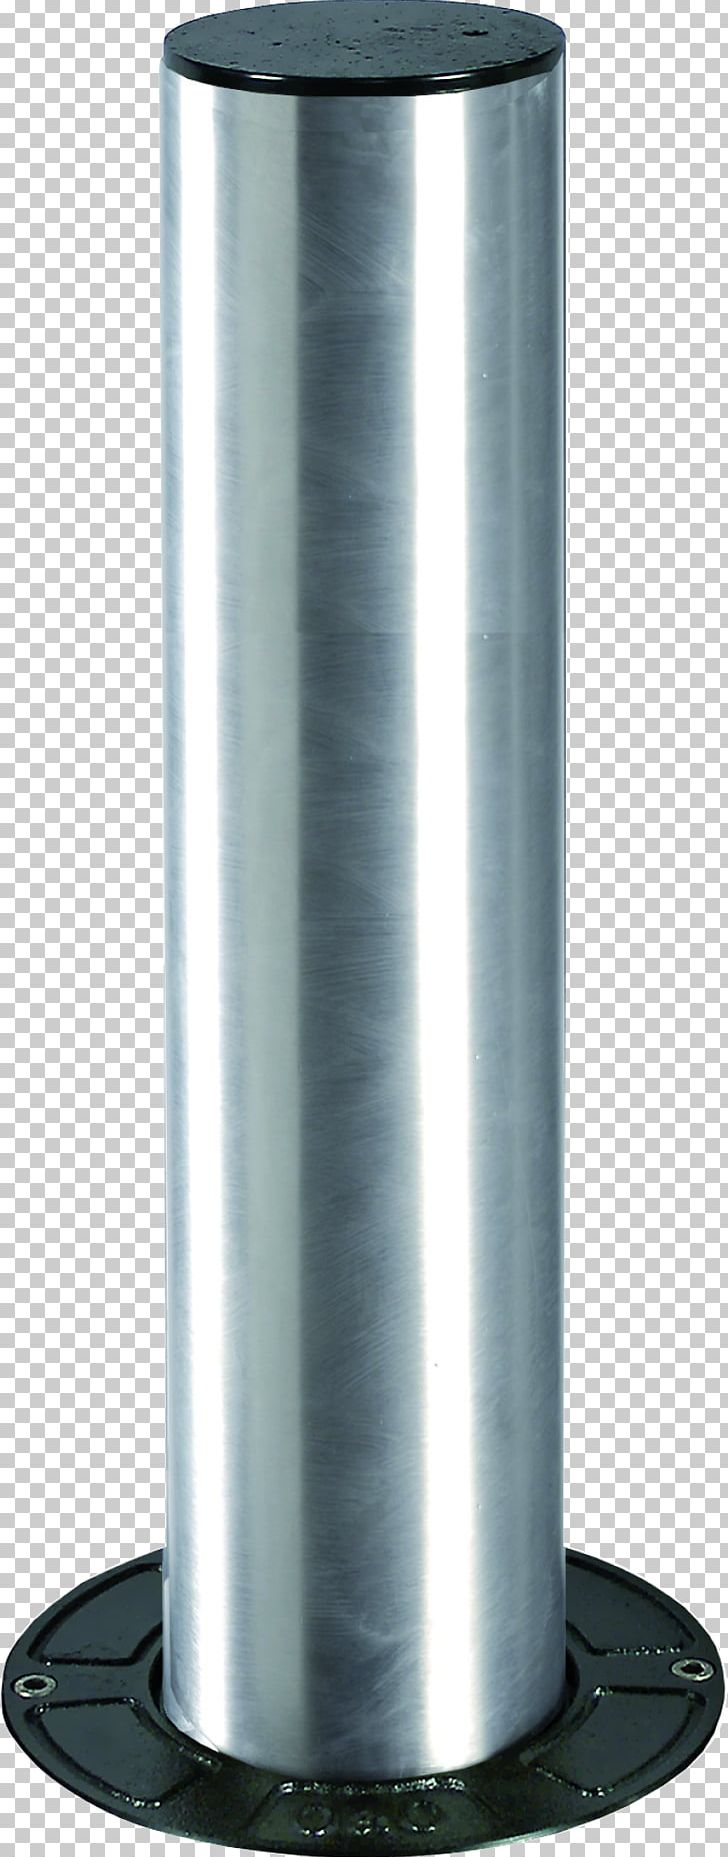 Bollard Stainless Steel Computer Hardware Product Manuals PNG, Clipart, Aesthetics, Bollard, Computer Hardware, Cylinder, Data Free PNG Download